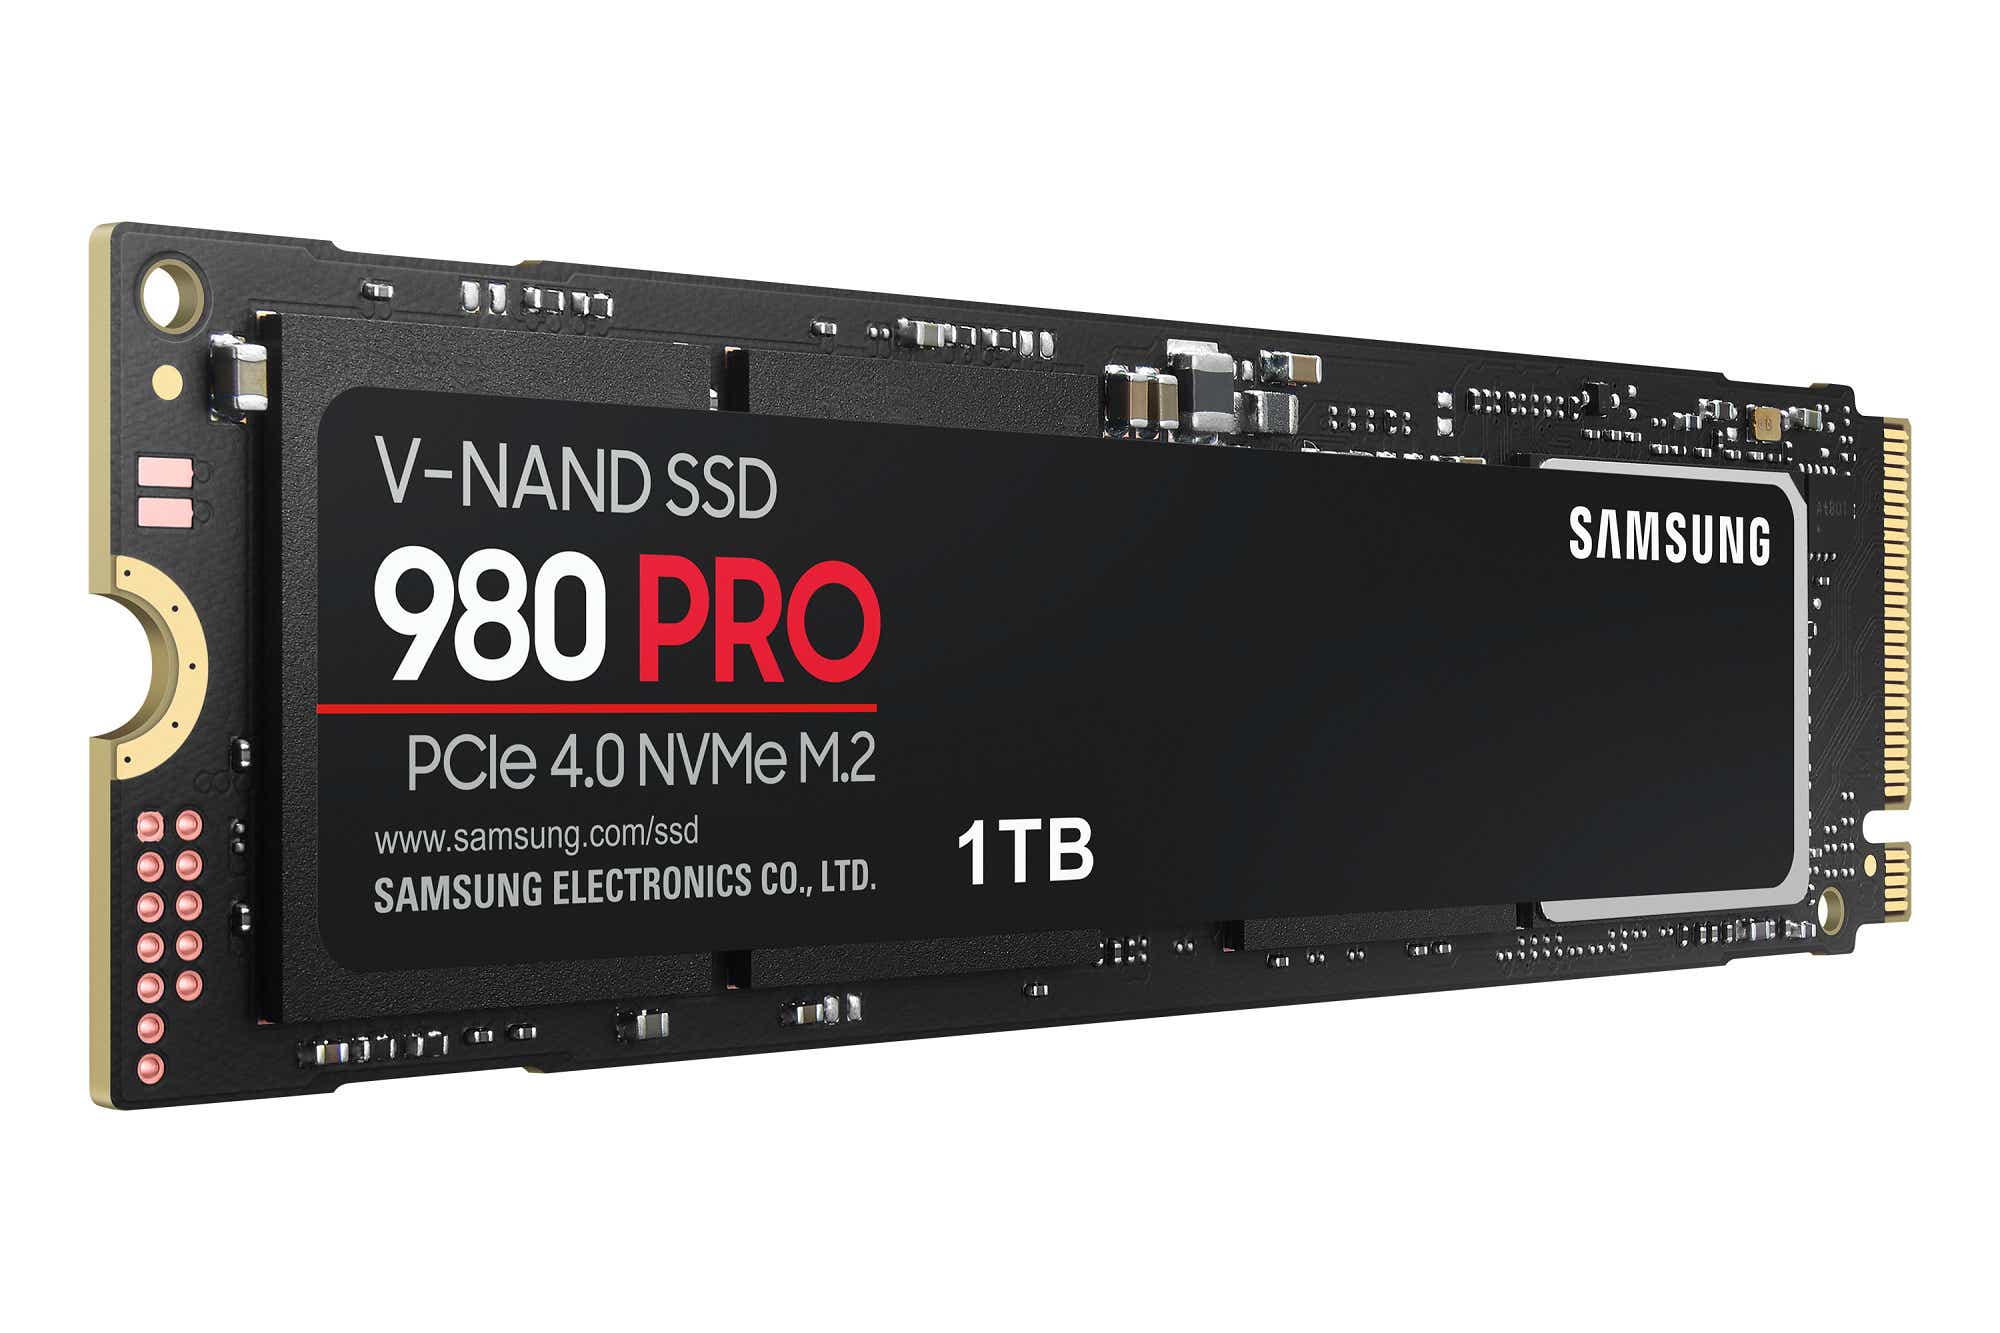 Samsung 980 Pro - Best PCIe 4.0 SSD for smaller capacities